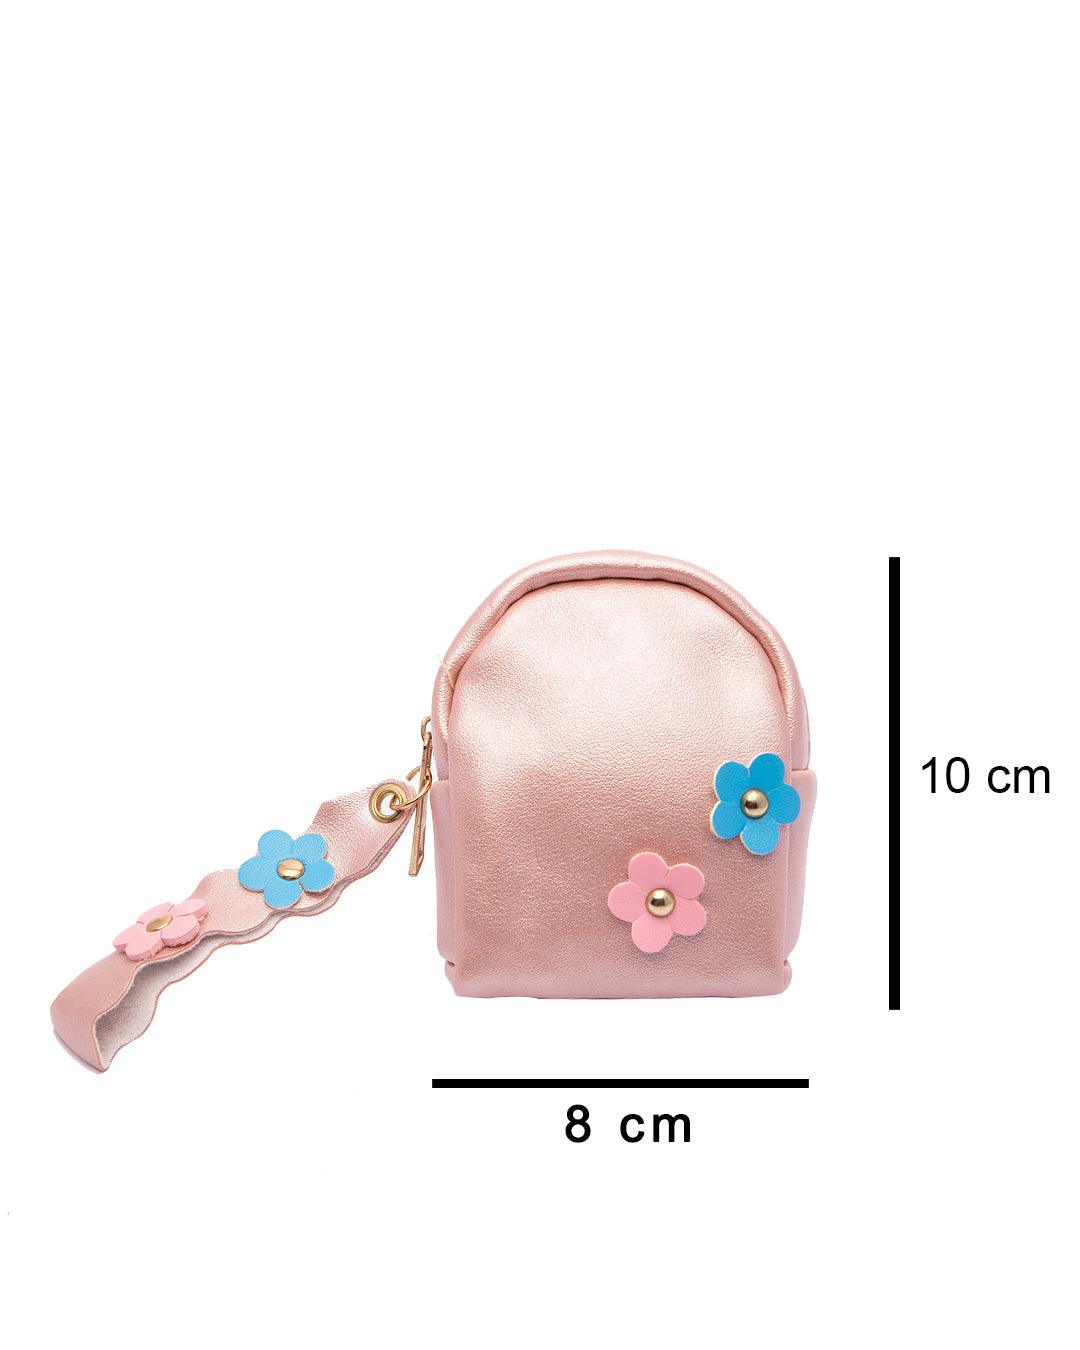 Buy Small Leather Coin Purse Online India at Nutcaseshop.com